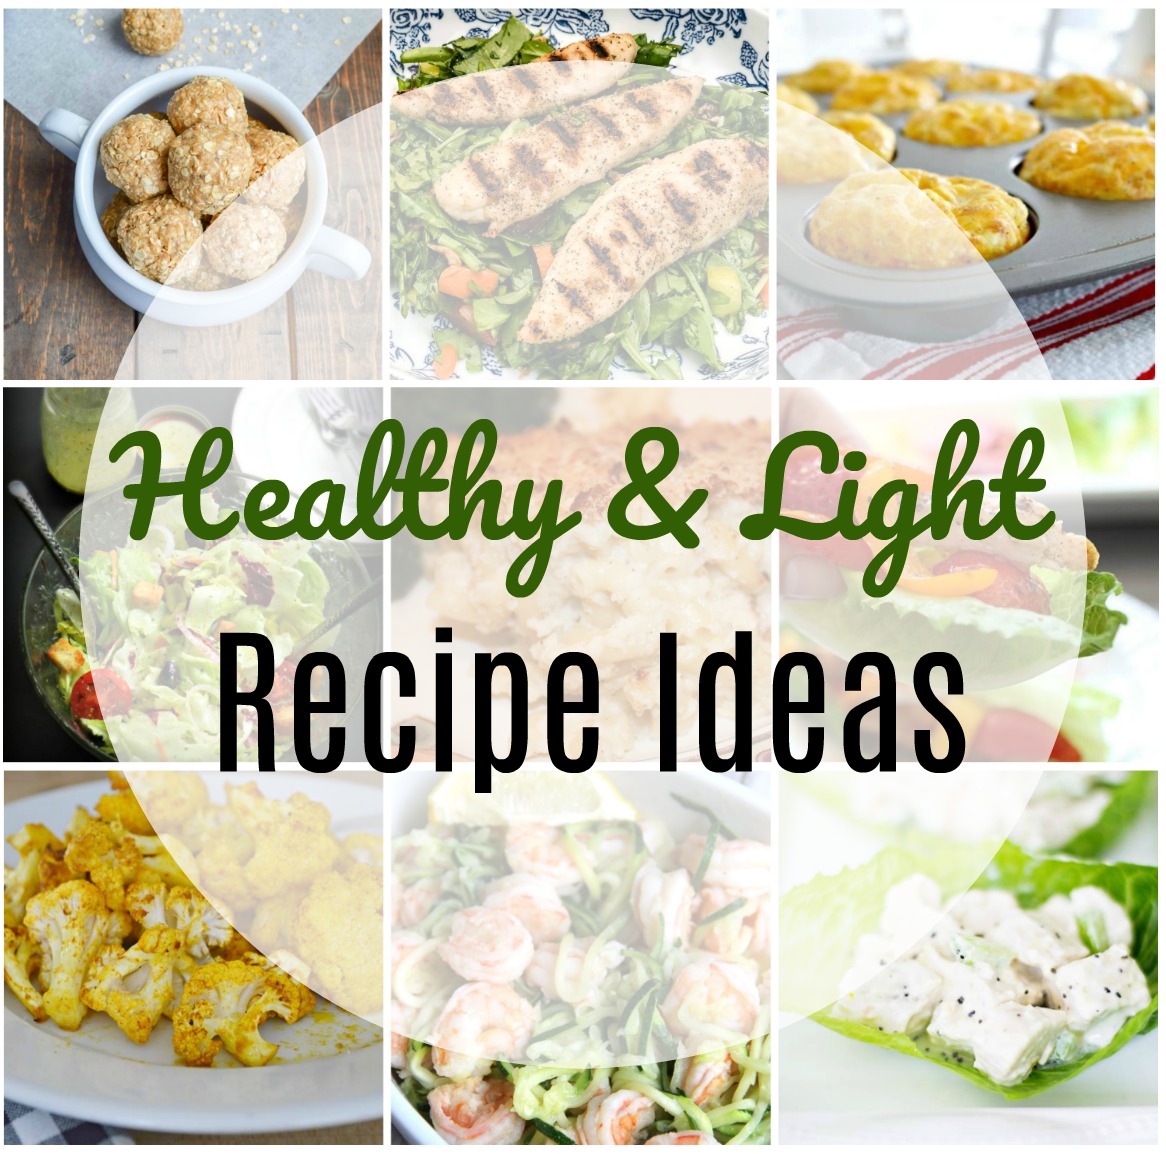 Light and Healthy Recipe Ideas - Get 12 recipes that are low in calories and healthy for you but also taste great.